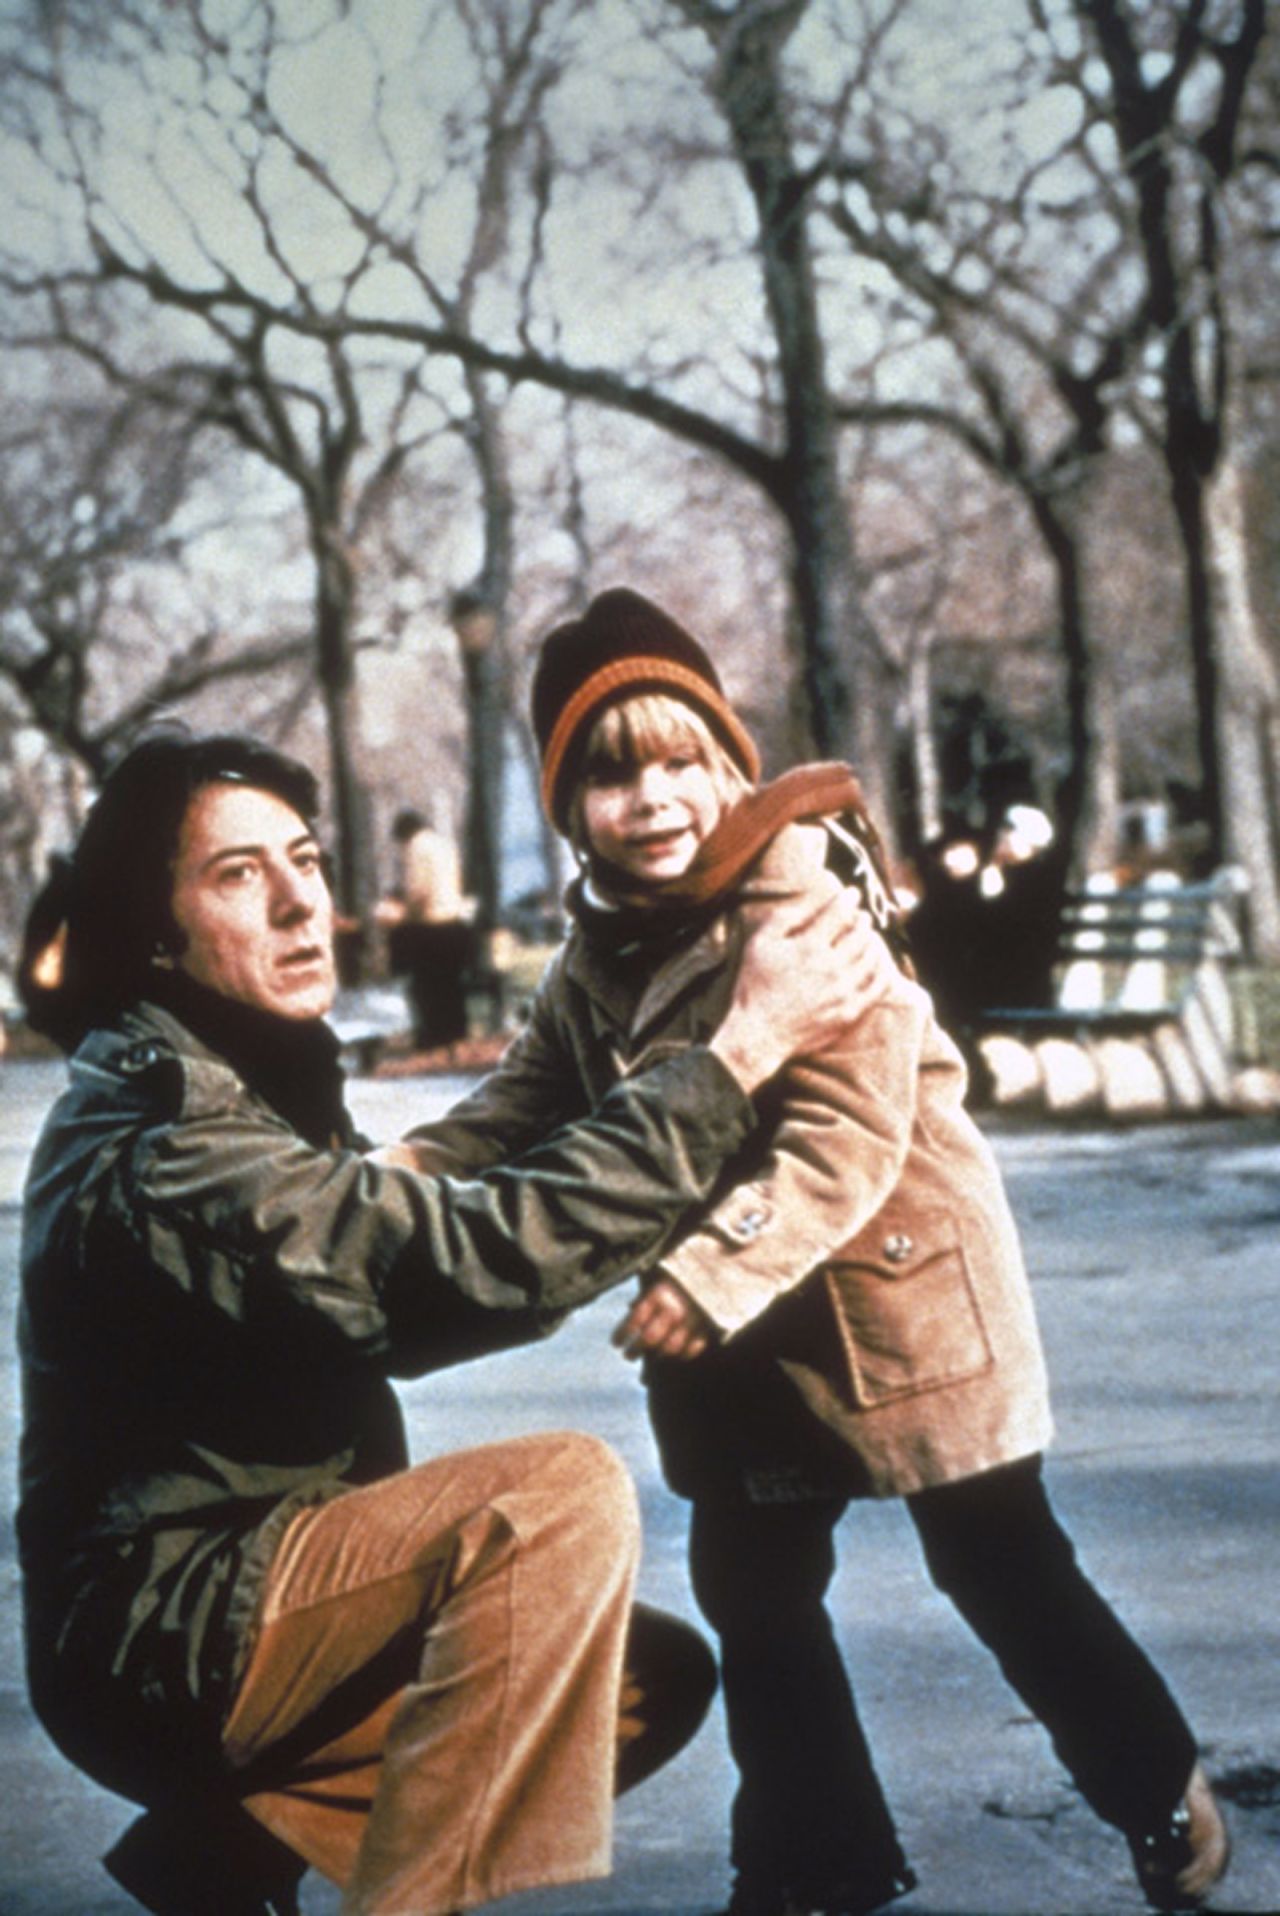 <strong>"Kramer vs. Kramer" (1980):</strong> Dustin Hoffman played a bewildered dad who had paid little attention to family life until his wife leaves him and he has to raise their son (Justin Henry, right) alone in "Kramer vs. Kramer." A bitter custody battle ensues once the wife (played by Meryl Streep) decides she wants her son back. Both Hoffman (best actor) and Streep (best supporting actress) won Oscars for their roles, and Robert Benton took home direction and writing honors for the film.